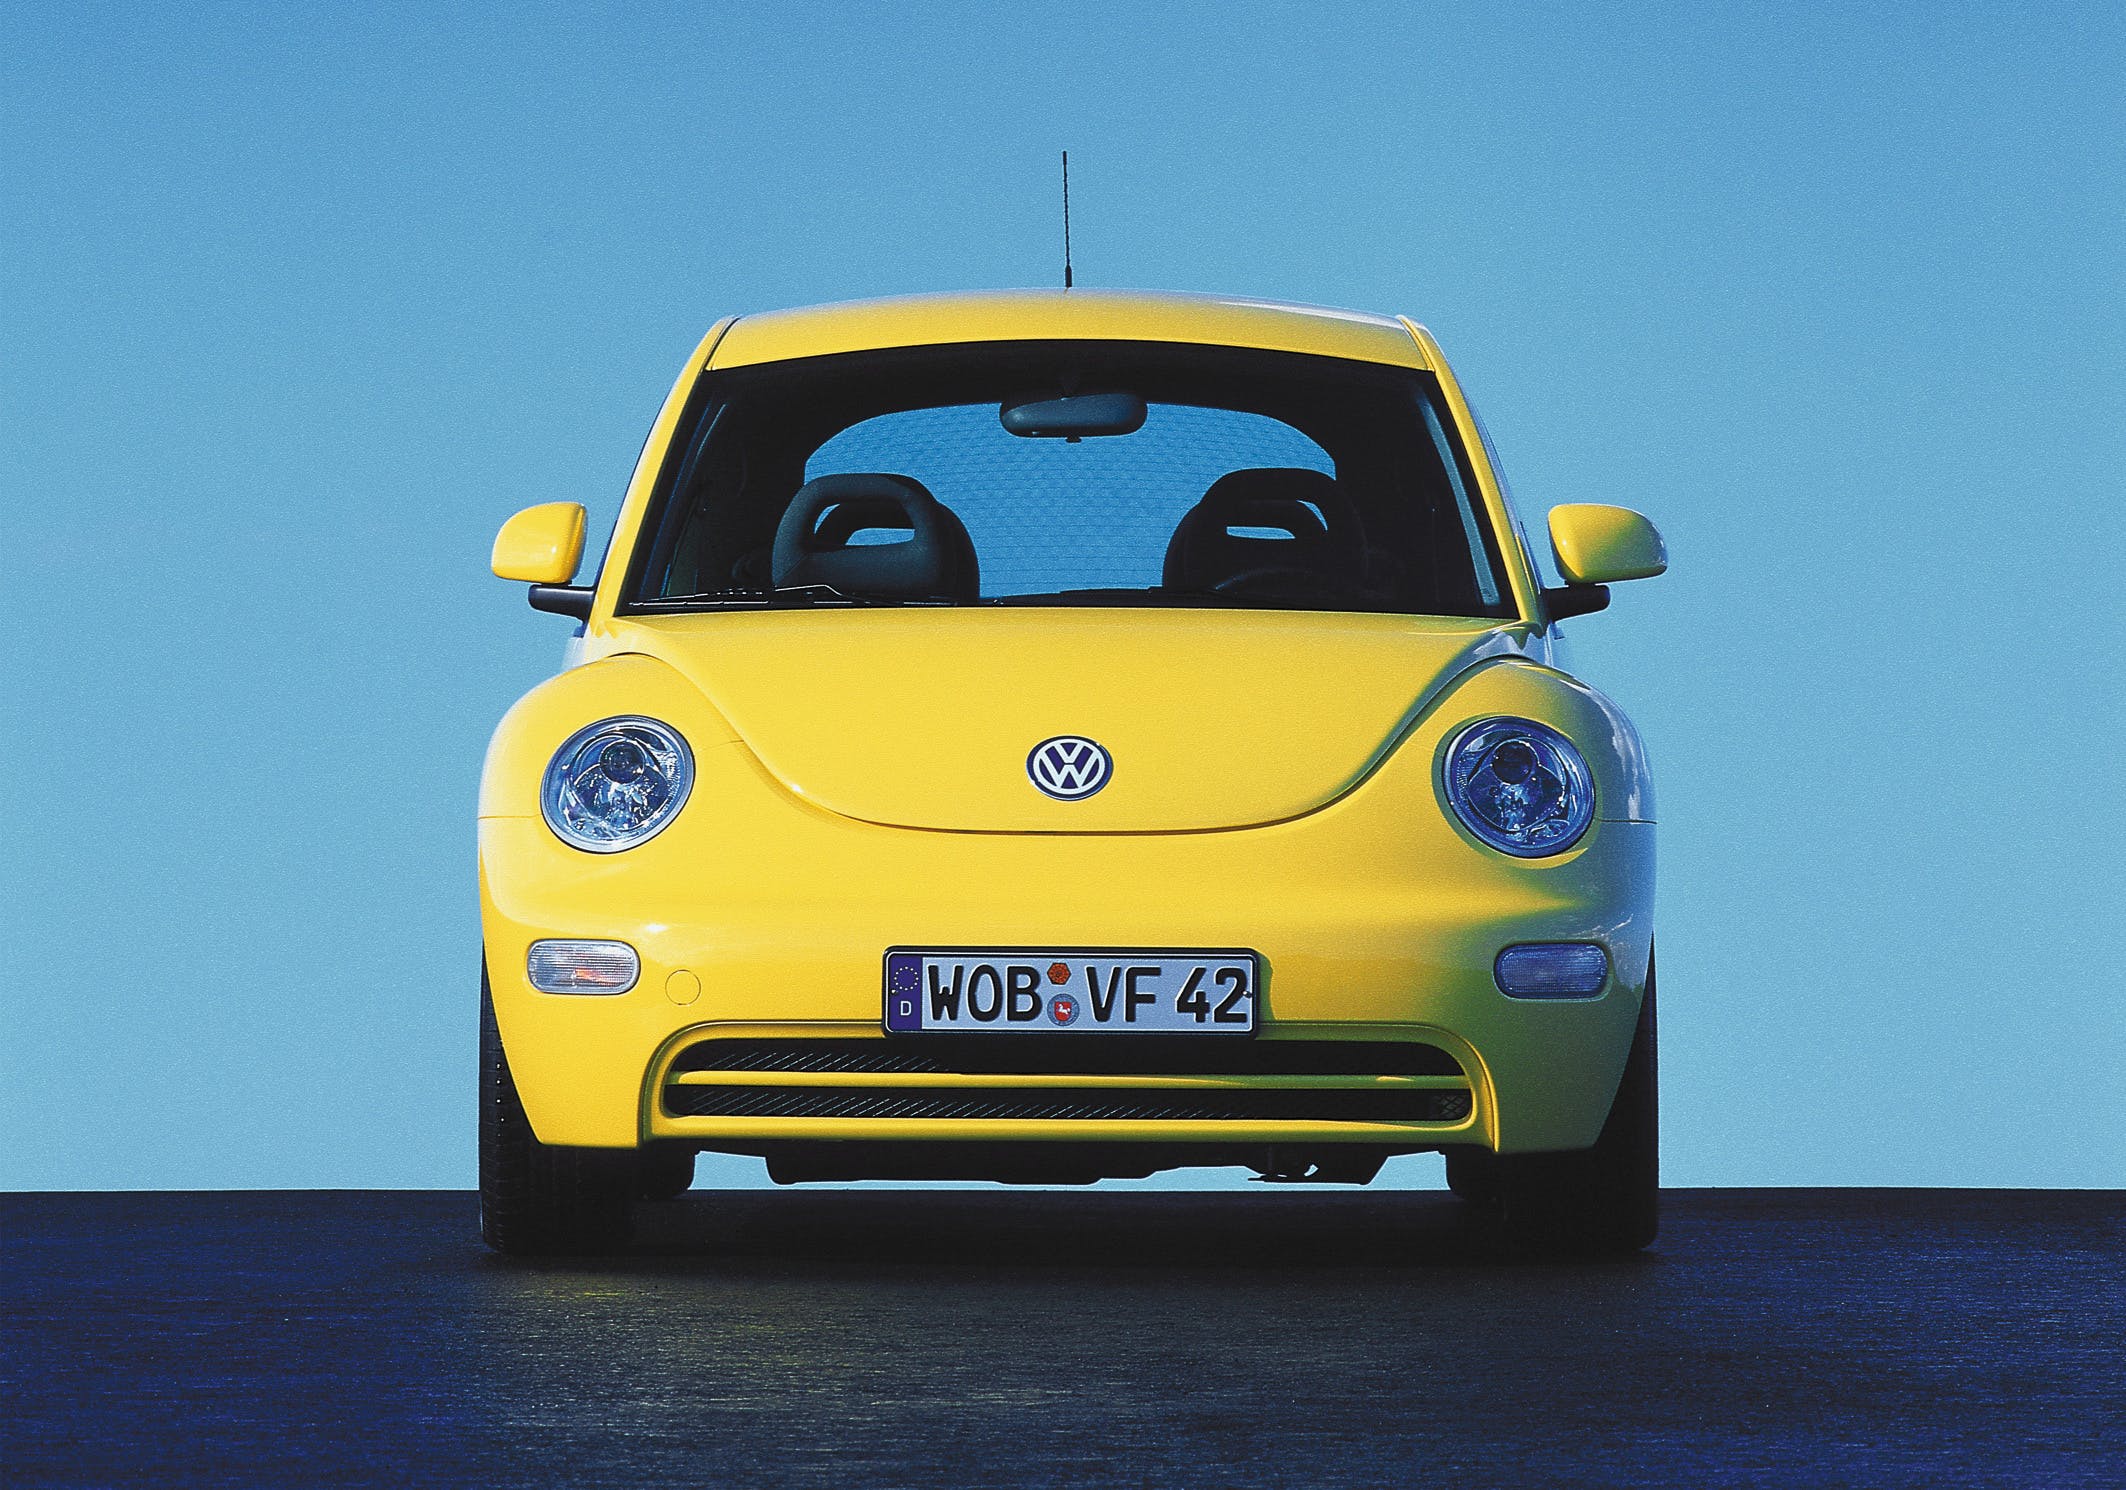 Can VW's New Beetle shed boomer nostalgia to win younger hearts? - Hagerty  Media